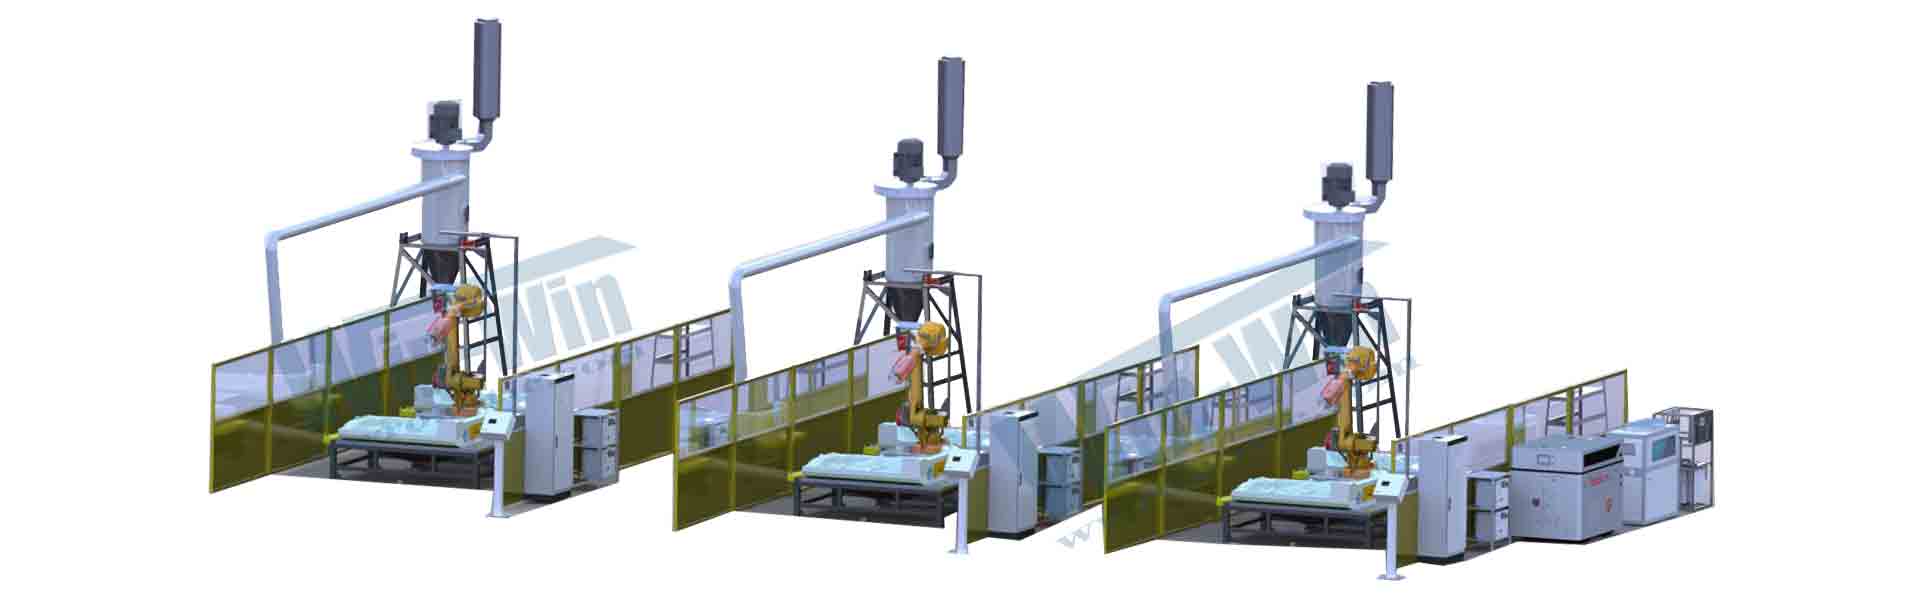 Multi-robot integrated water cutting system(图1)